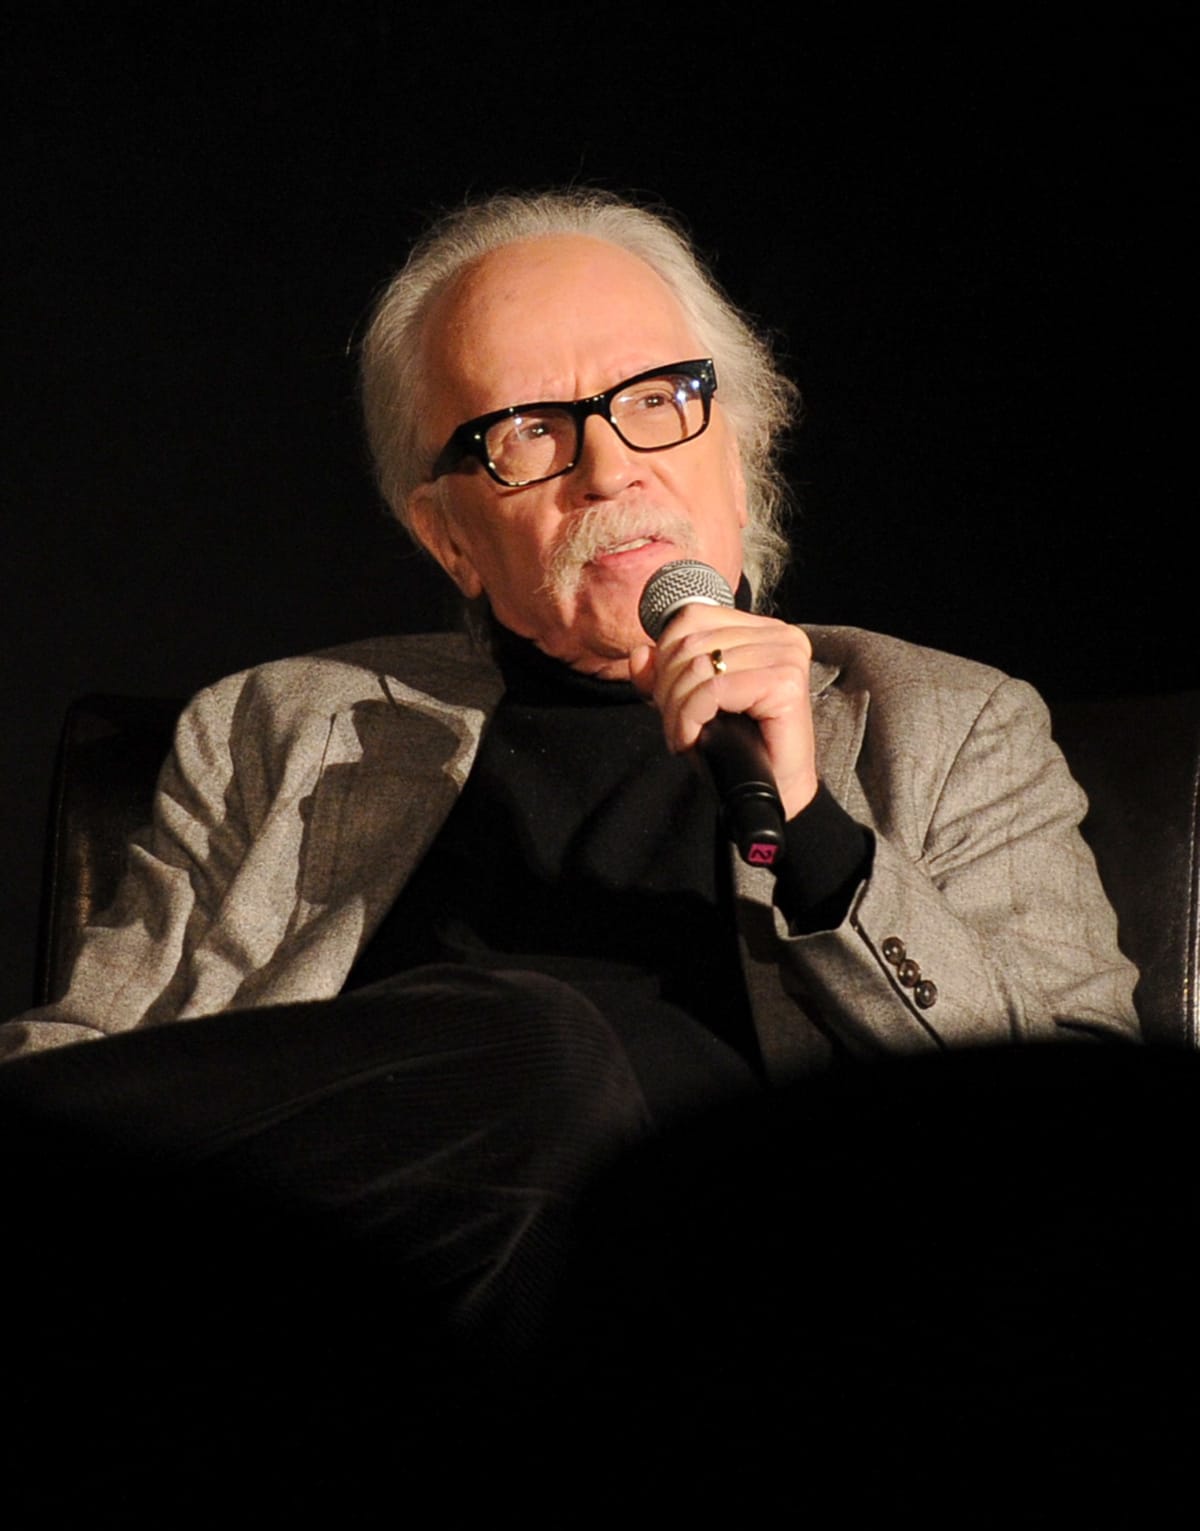 CHICAGO, IL - AUGUST 22: Director John Carpenter attends Wizard World Chicago Comic Con 2014 at Donald E. Stephens Convention Center on August 22, 2014 in Chicago, Illinois. (Photo by Paul Warner/WireImage)